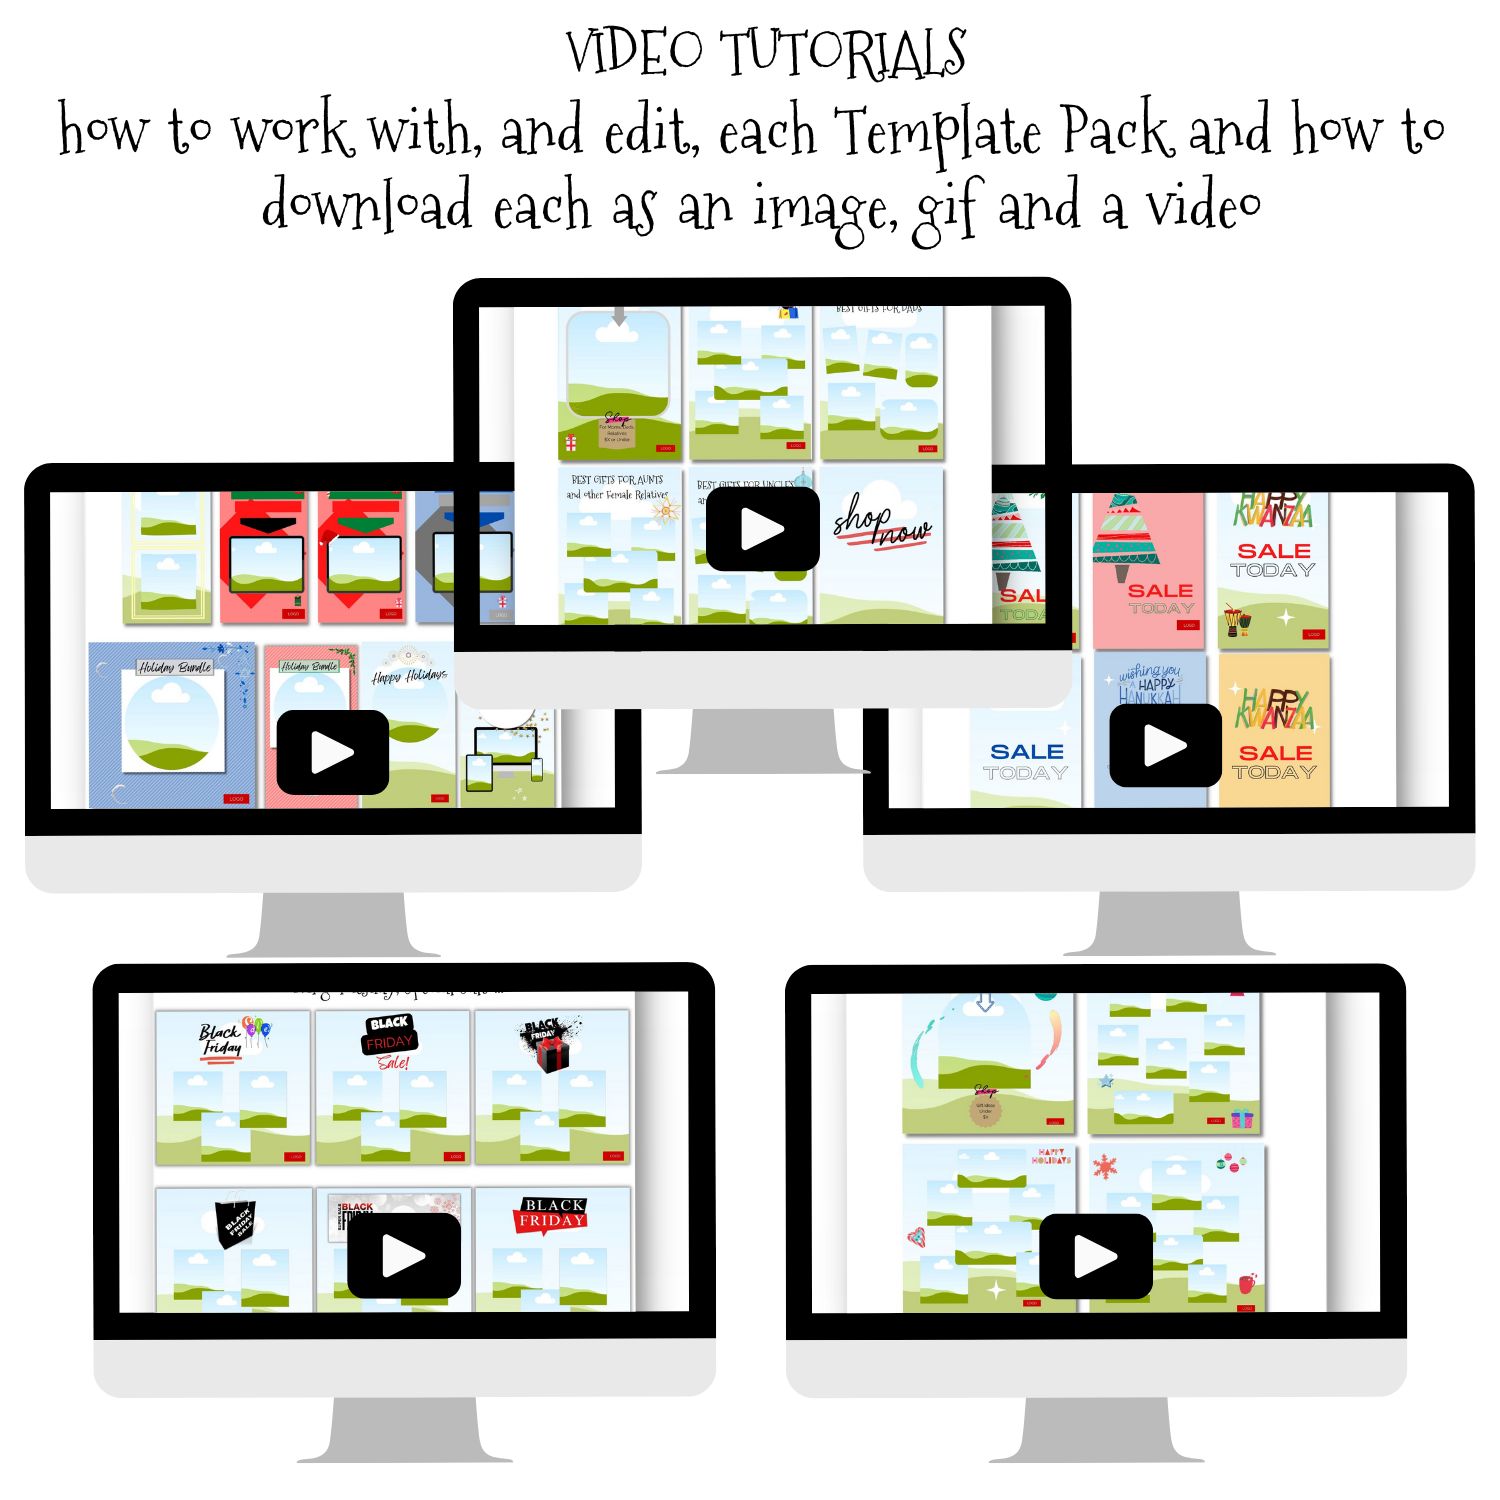 Instructions on How to Use Product Trailer Video Templates